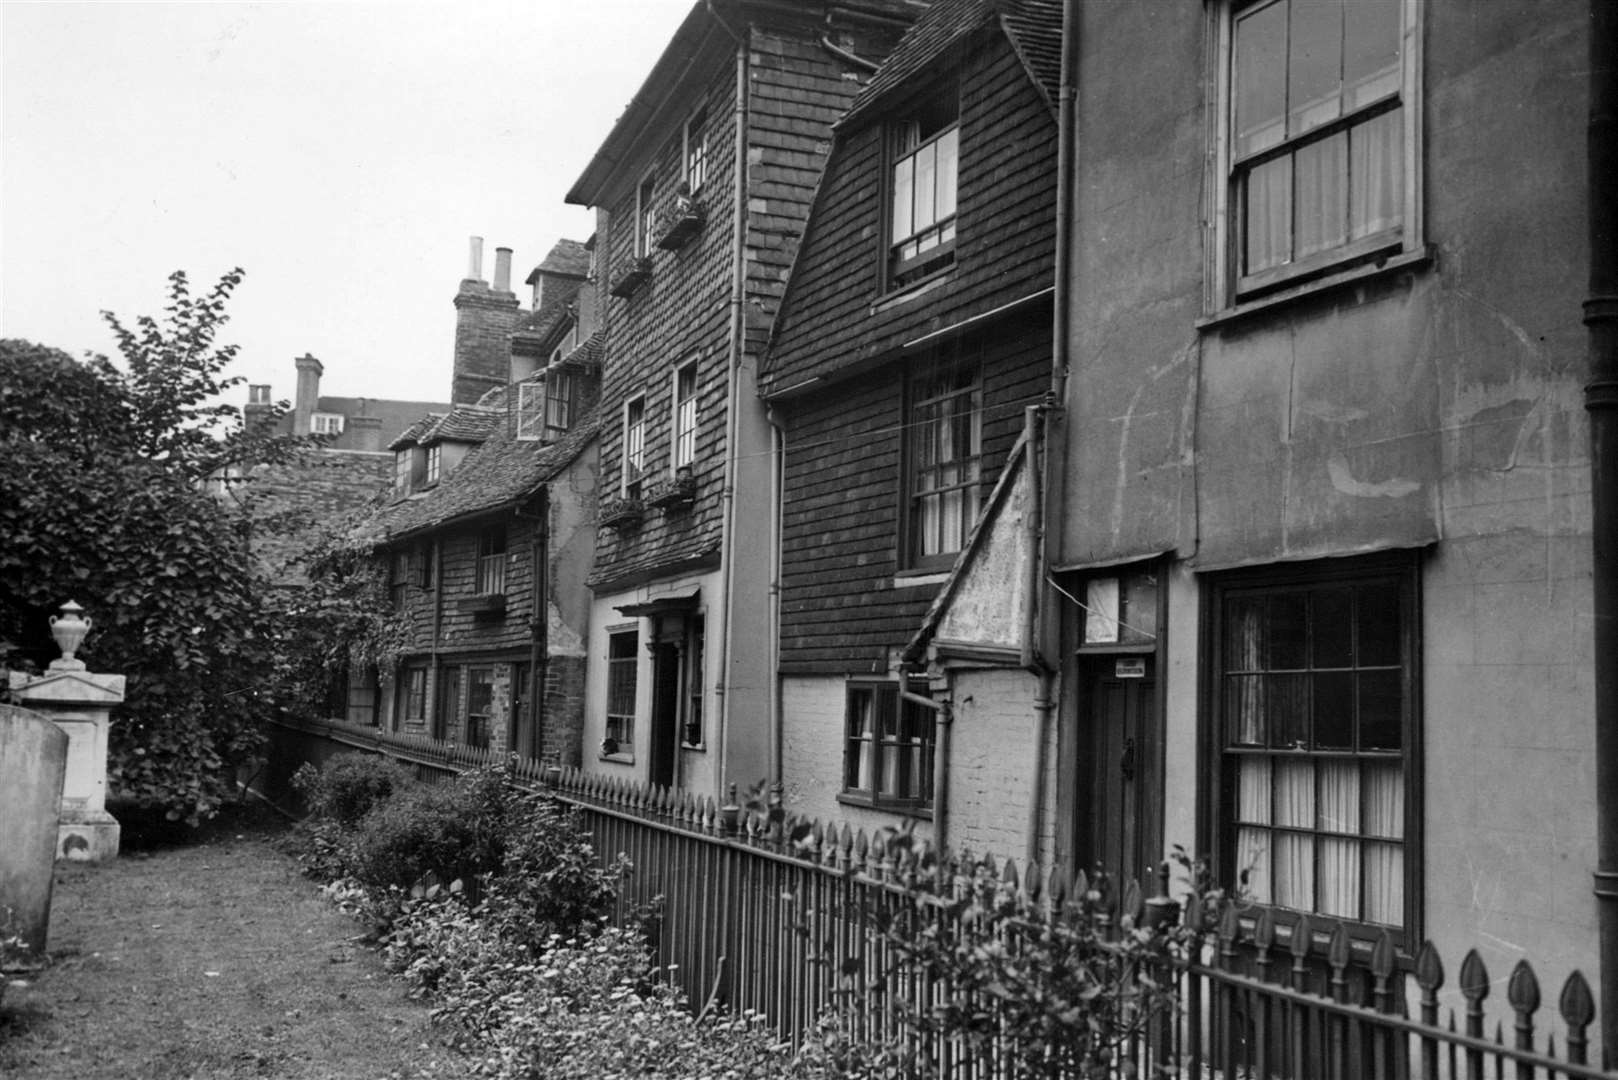 Churchyard, 1941. On immediate inspection, one would not have thought the churchyard and rear of the buildings in the High Street have not changed, but closely the squared bay which today exists at the rear of no.63 High Street (seen here with no.59 and 61) is absent, and probably at a time when the premises of restaurant and takeaway ‘The Chilli Bite’ was still a house. The other two aforementioned premises are Welfare Massage and employment agent MTP Recruitment